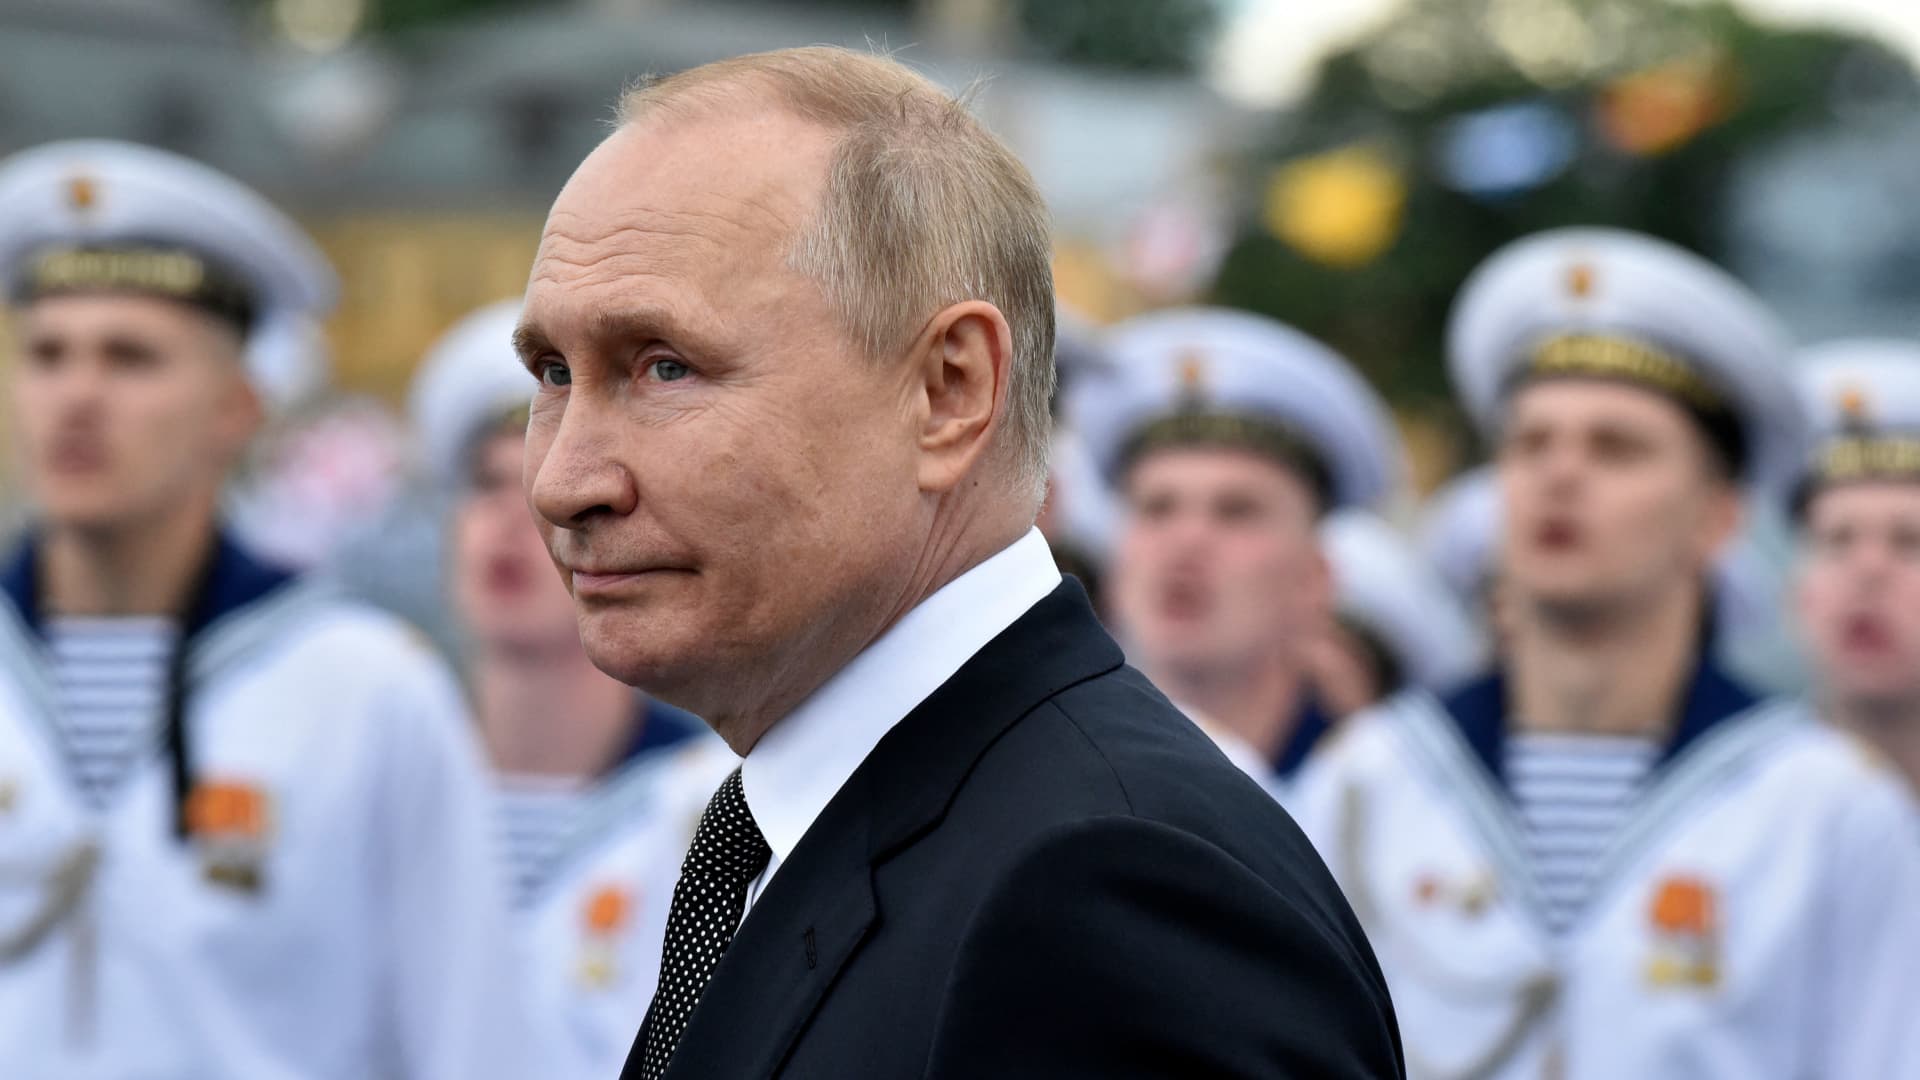 Russia's President Vladimir Putin reviewing naval troops as he attends the main naval parade marking the Russian Navy Day, in St. Petersburg on July 31, 2022.